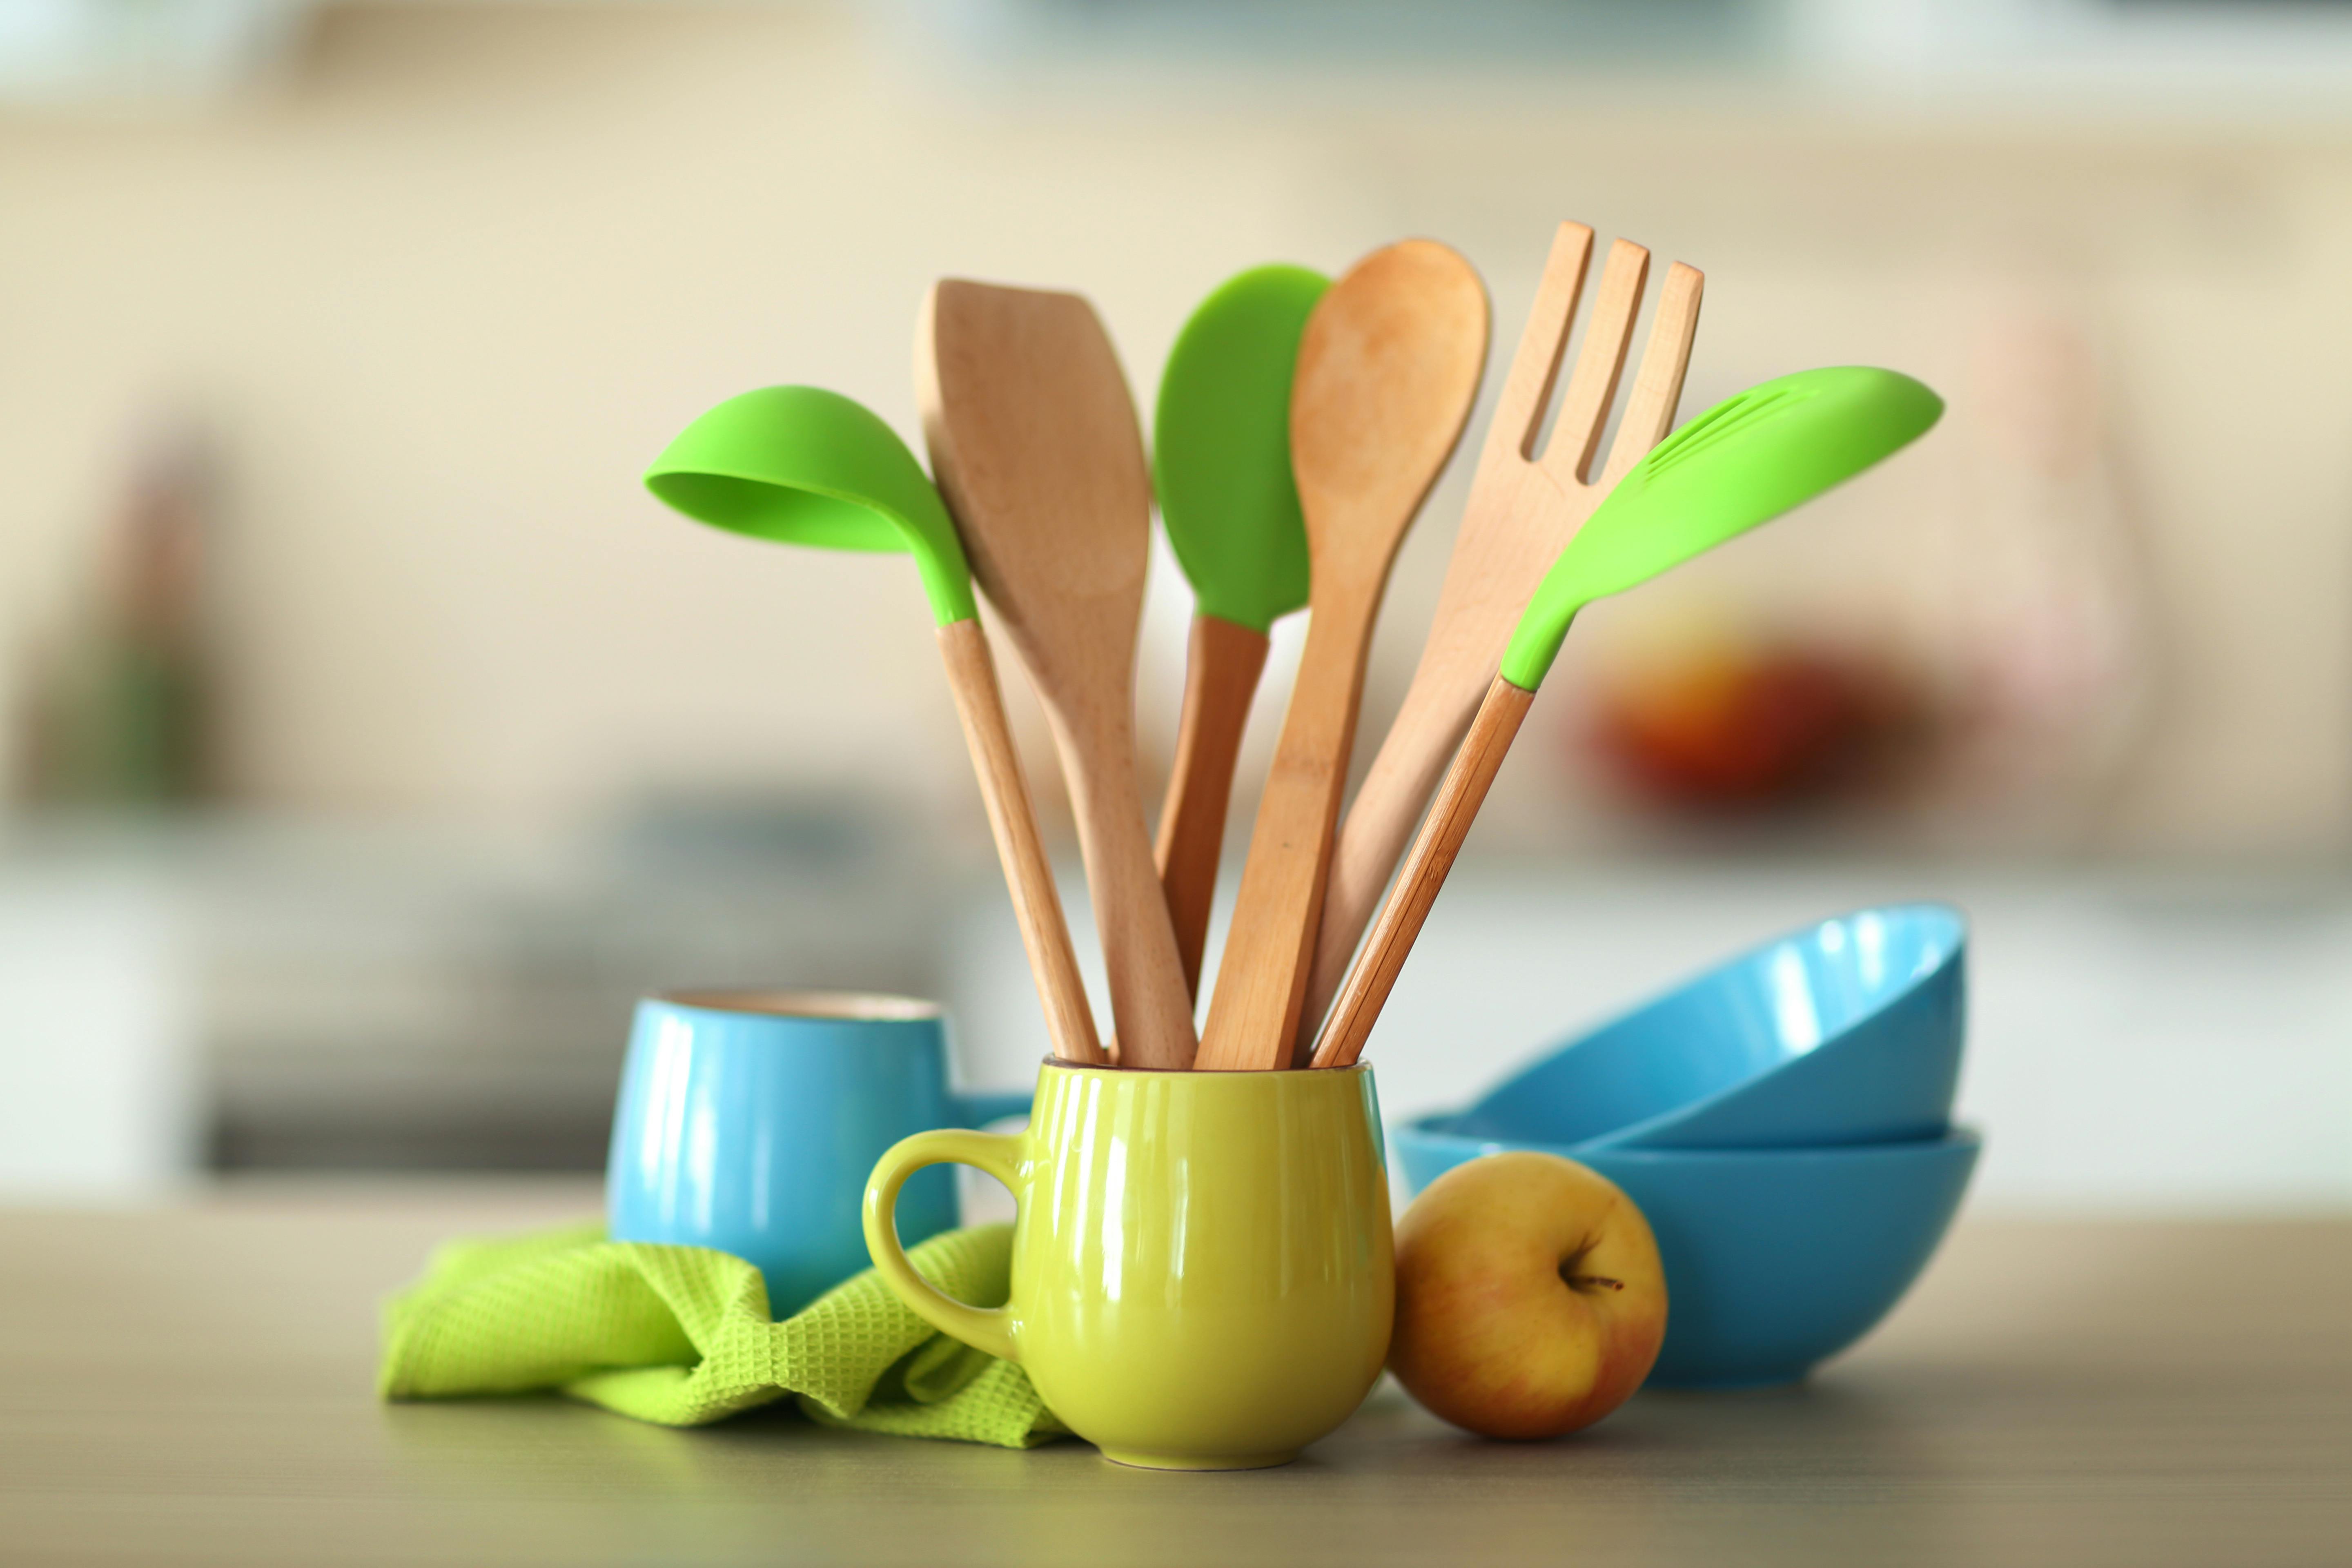 The Top Recommended Silicone Kitchen Utensils